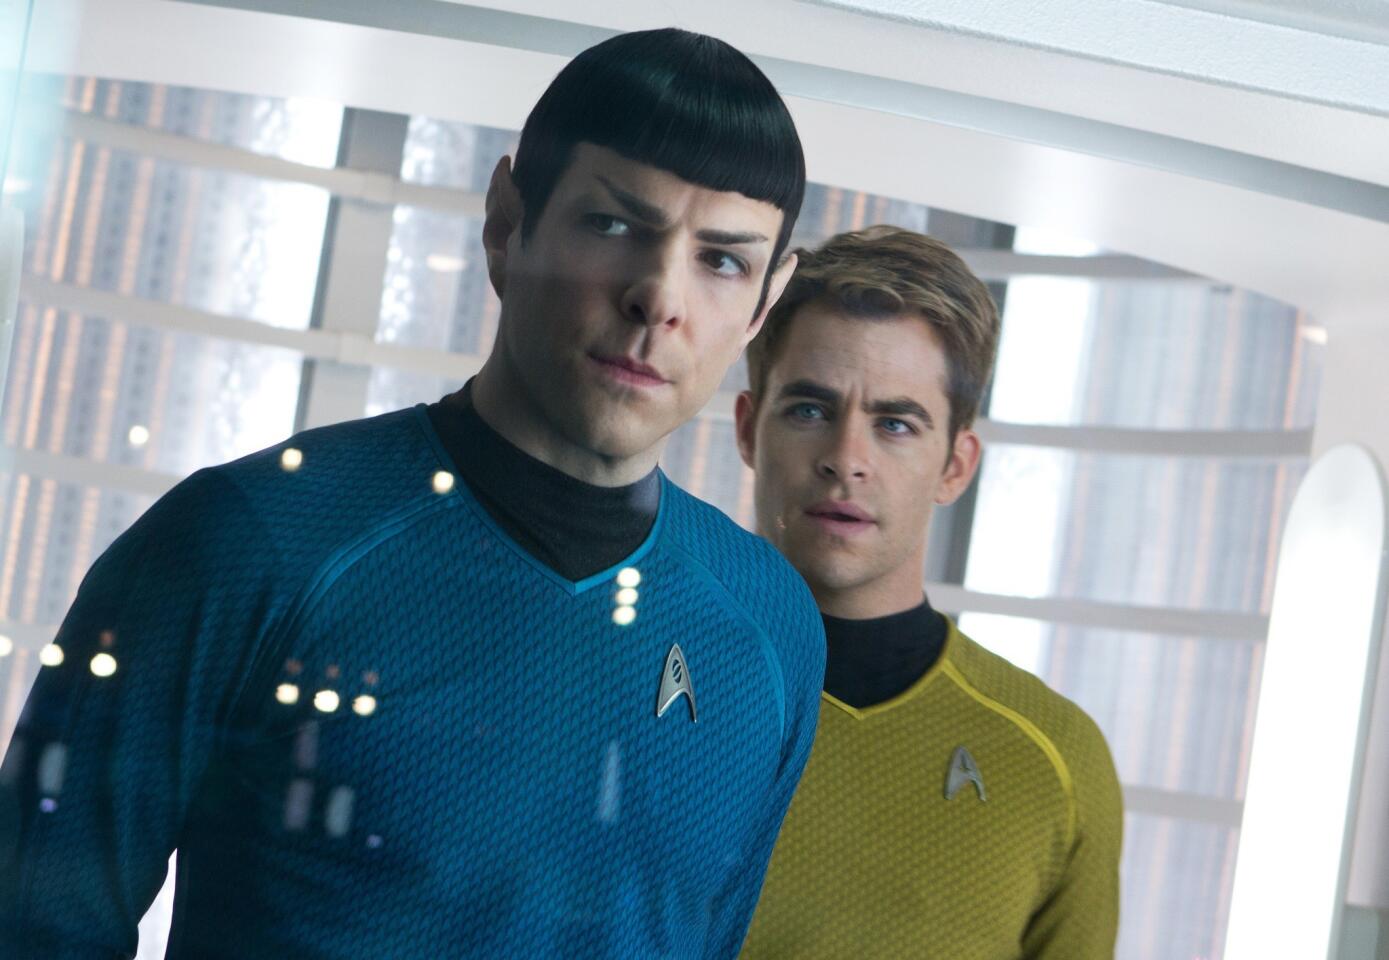 "Star Trek Into Darkness," which stars Zachary Quinto, left, as Spock and Chris Pine as Kirk, features attacks on crowded offices.